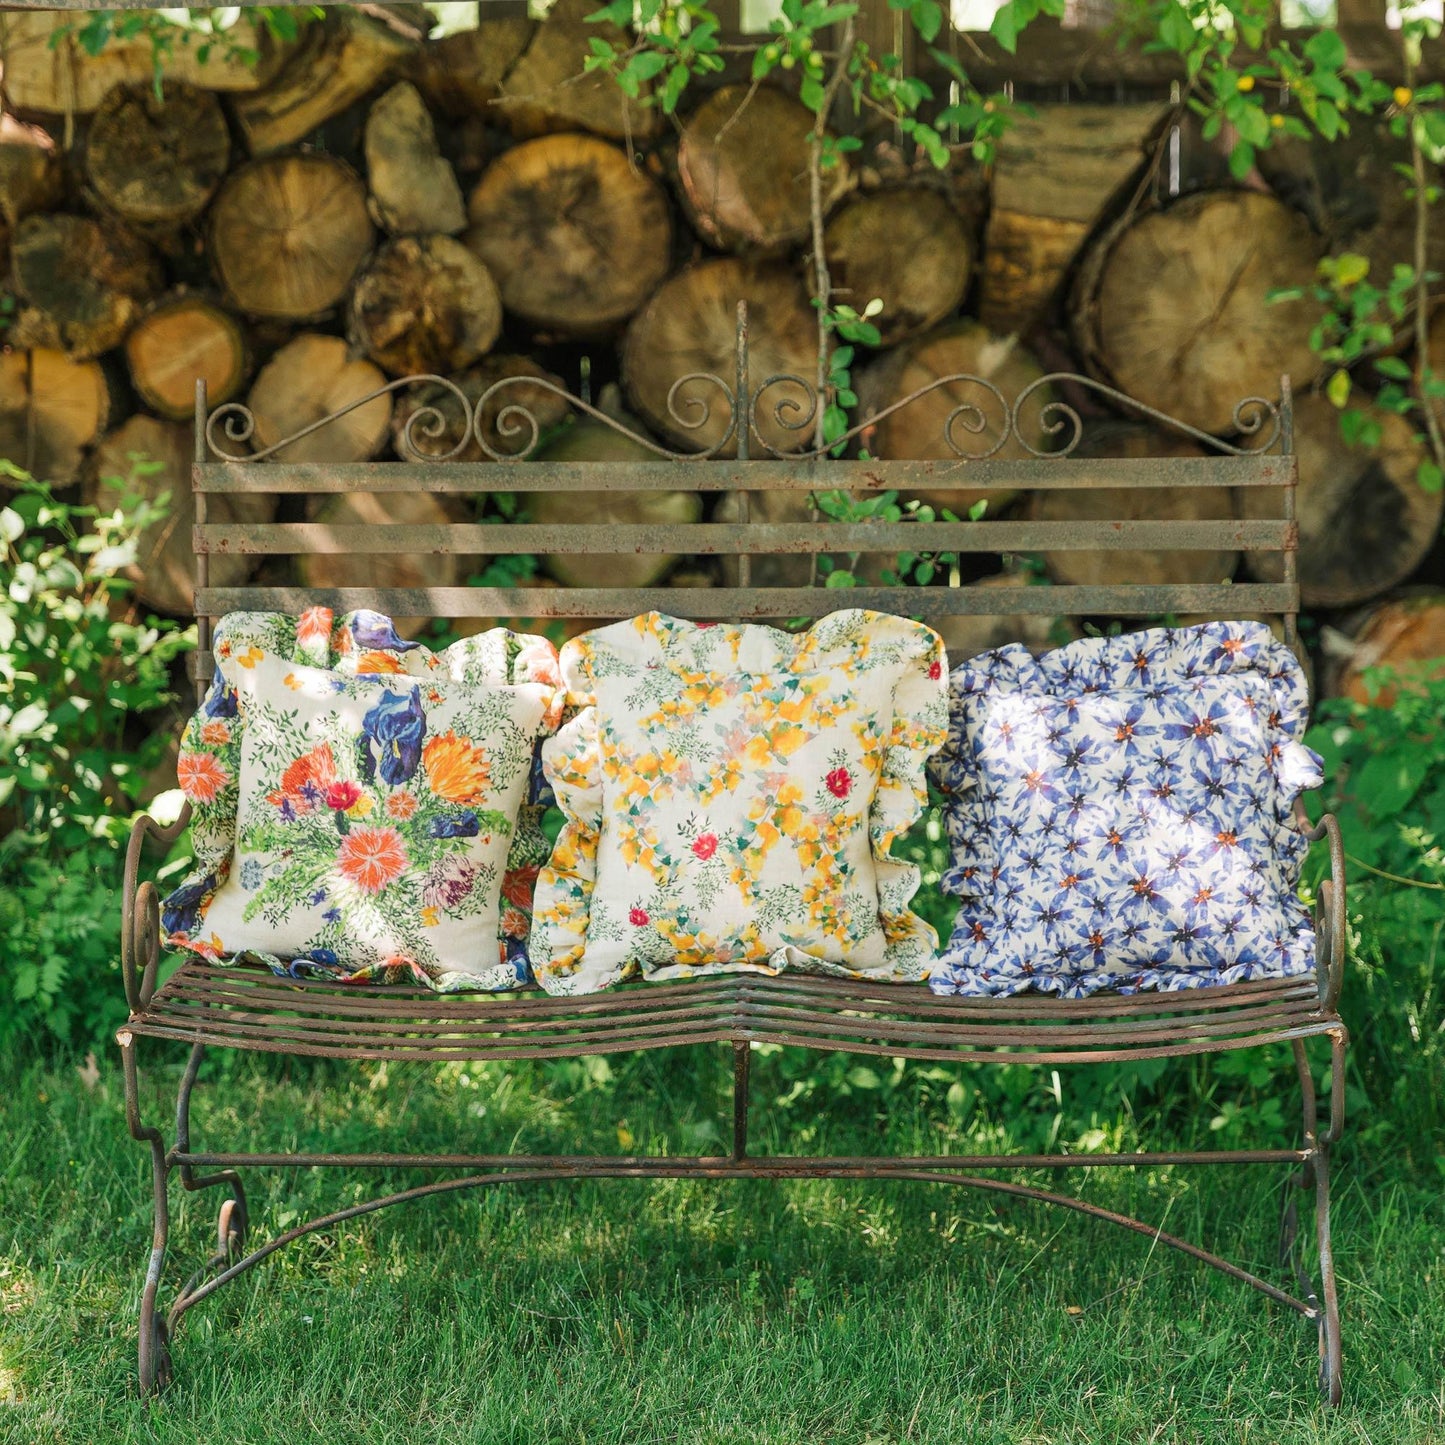 Three ruffled pillows printed with bright florals on an outdoor bench in a romantic setting.